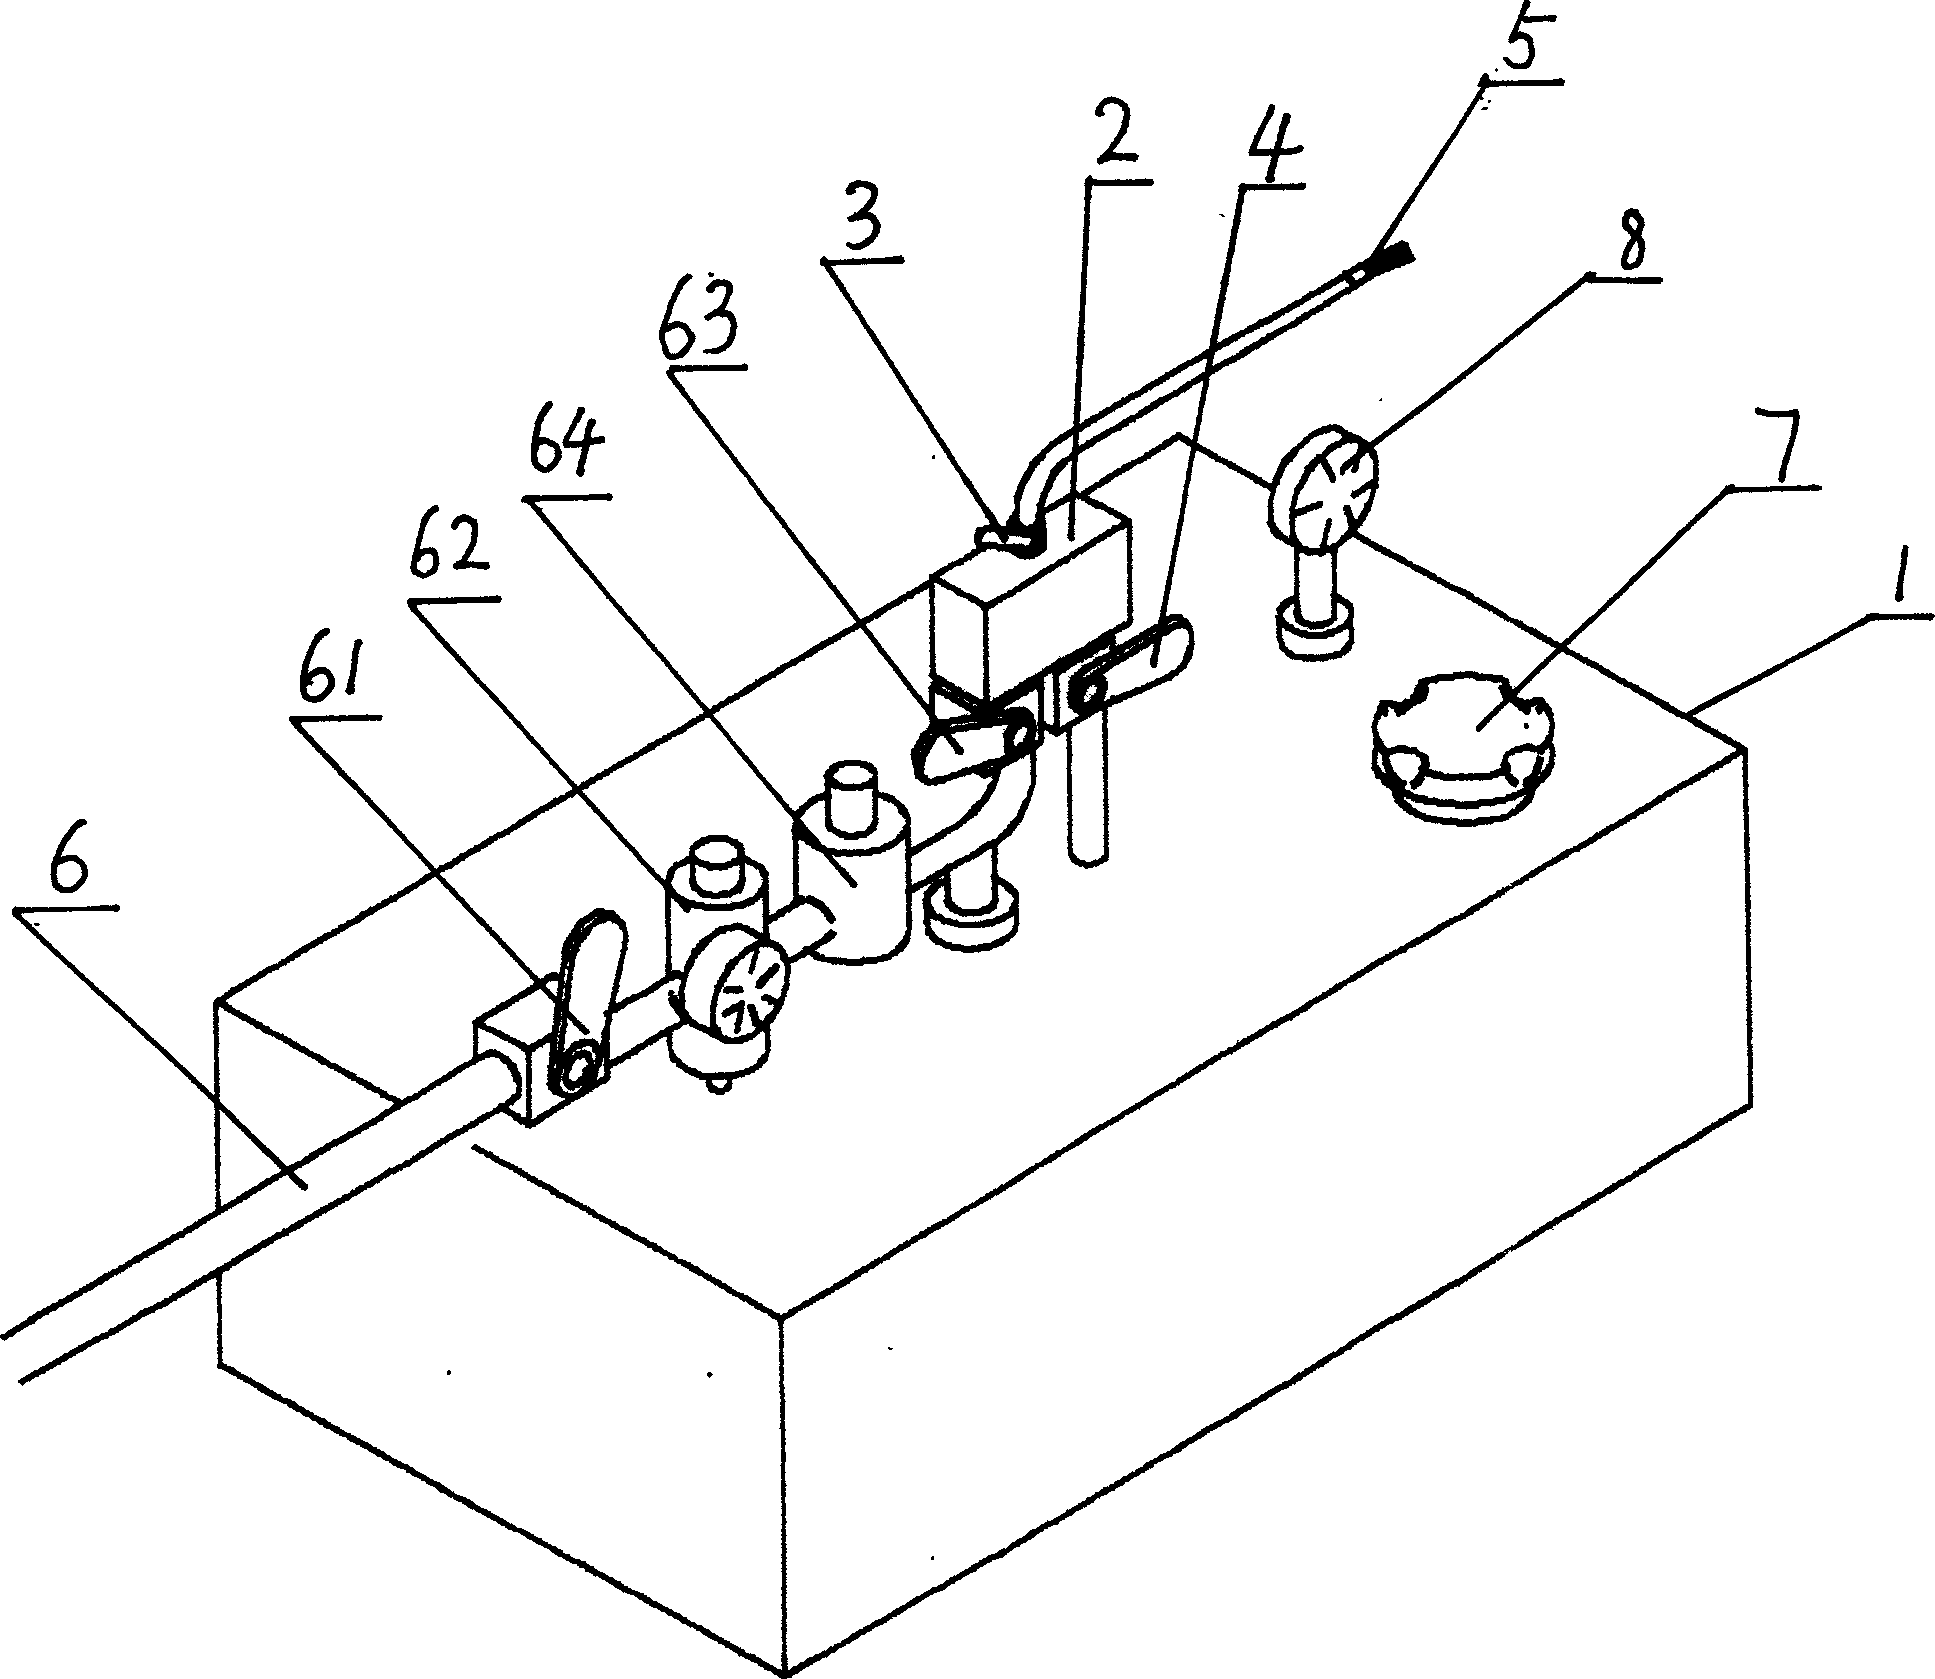 Roller atomized cutting technique and device thereof